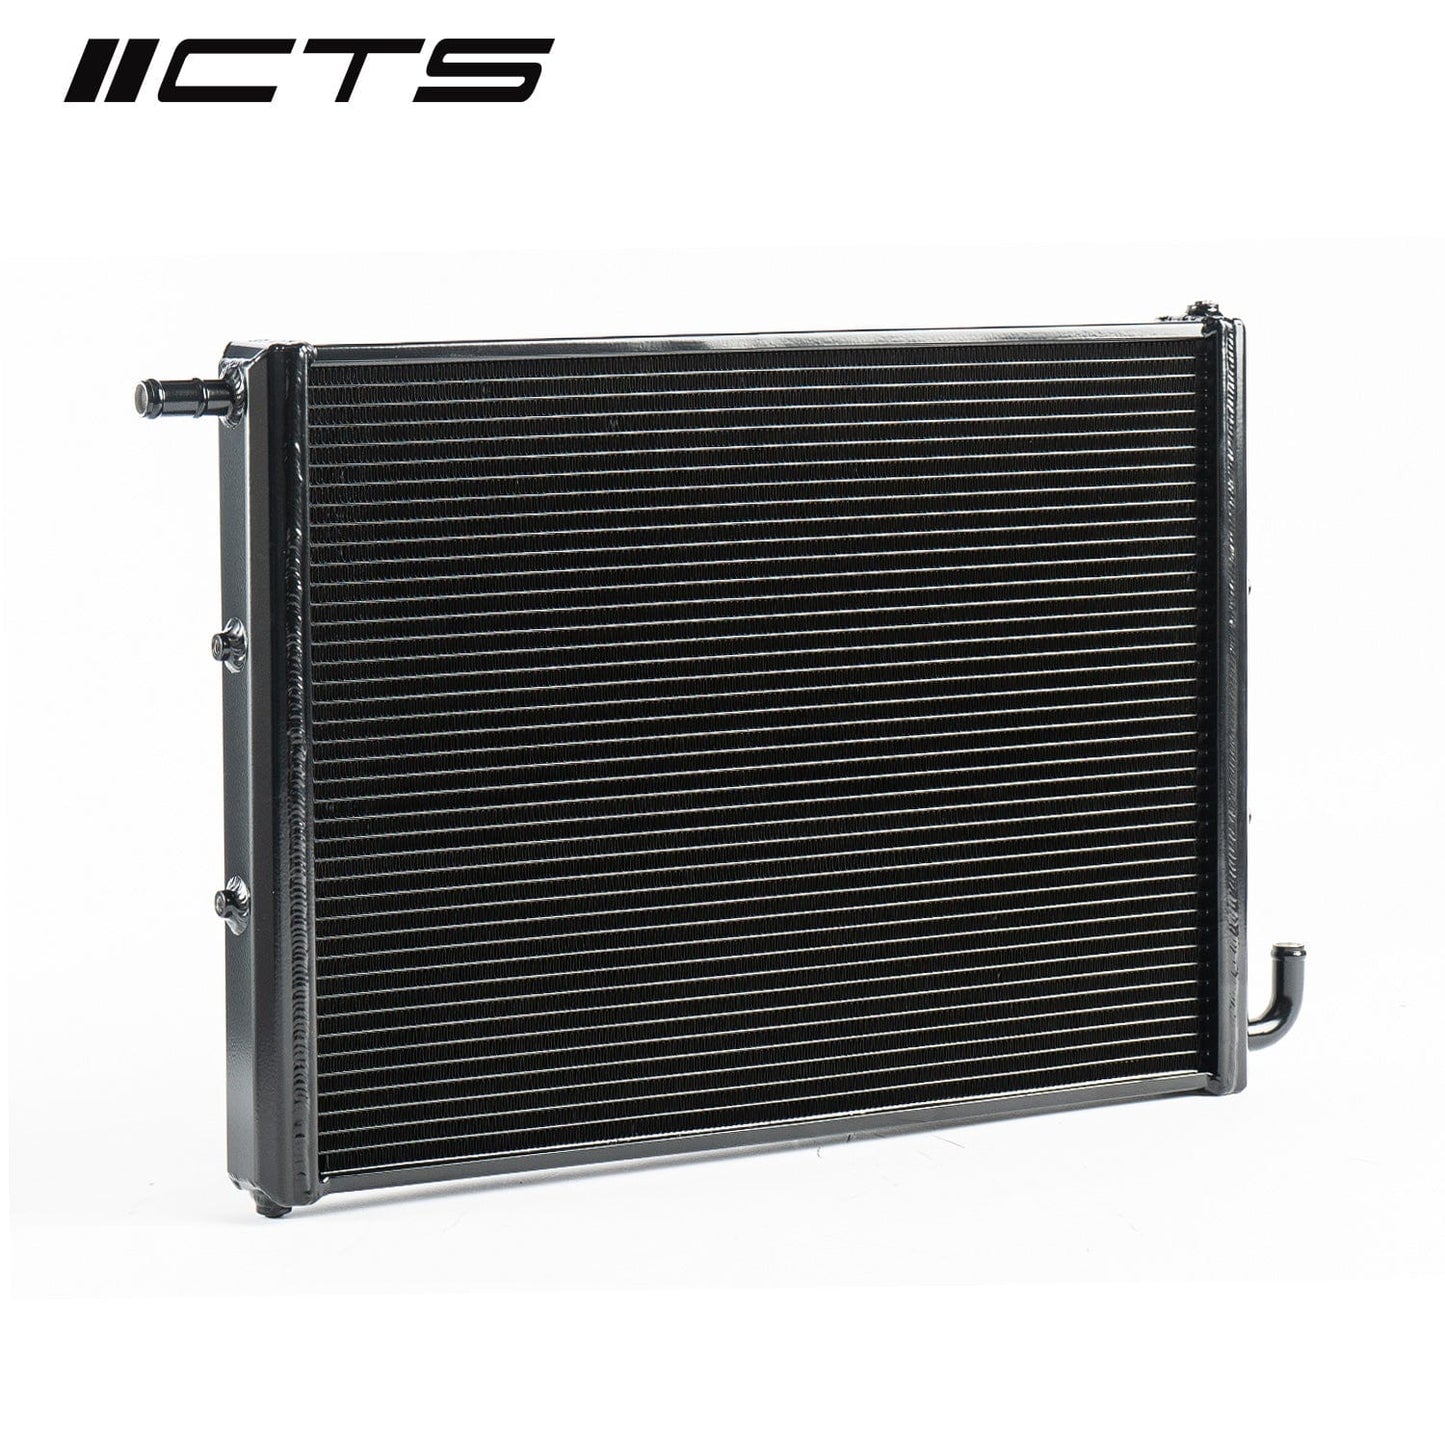 CTS Turbo Audi B8 B8.5 Air-to-Water Heat Exchanger (Intercooler) Upgrade for Supercharged 3.0T (S4, S5, Q5 & SQ5)